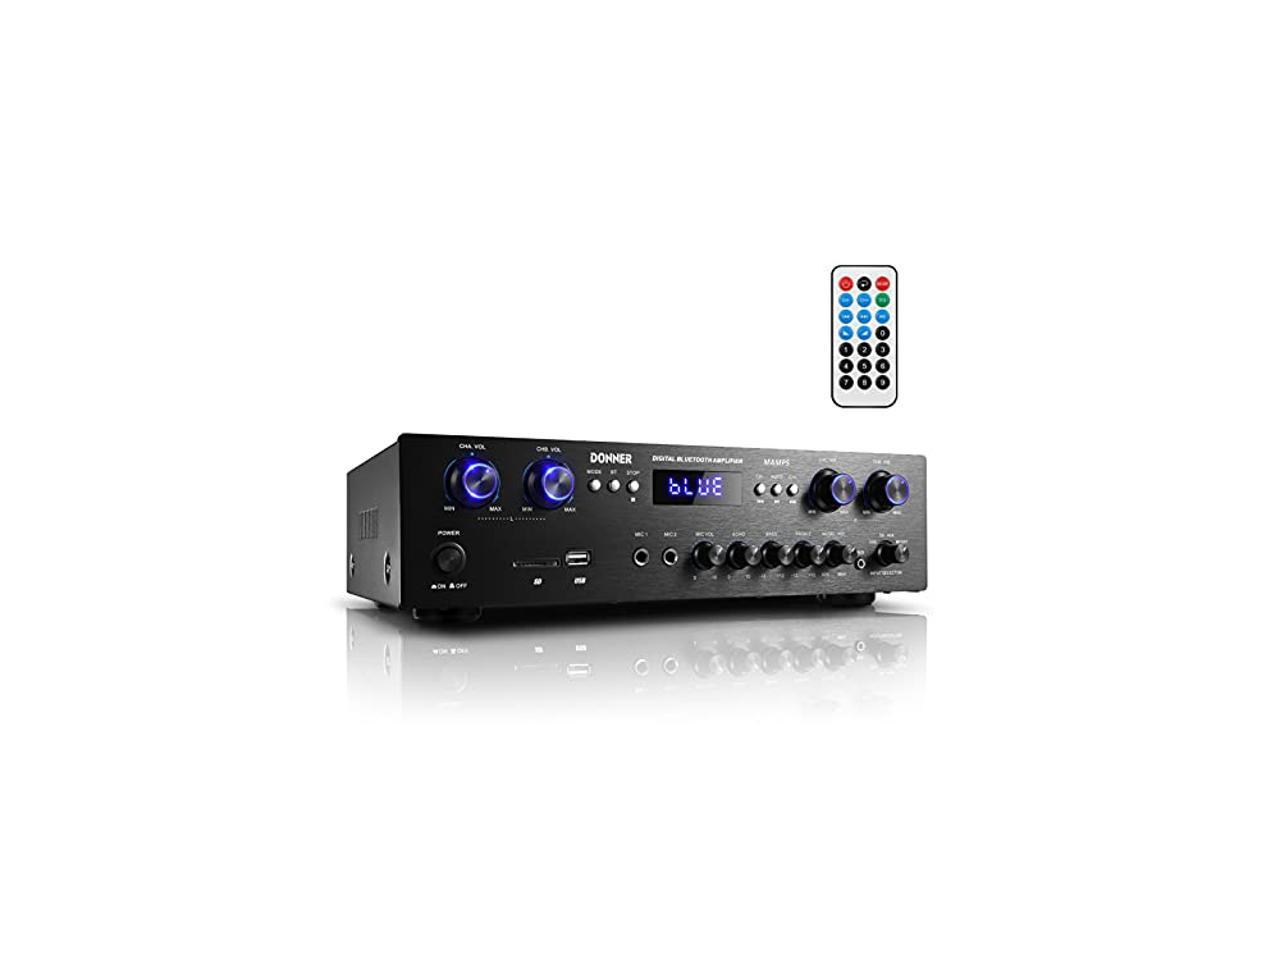 ASHATA Stereo Amplifier Silver Digital Amp Mini HiFi 2.1 Stereo Bass Auto Car Home Audio Power Amplifier With RCA & 3.5mm Audio Input,Two Pairs of Speaker Output Clips 